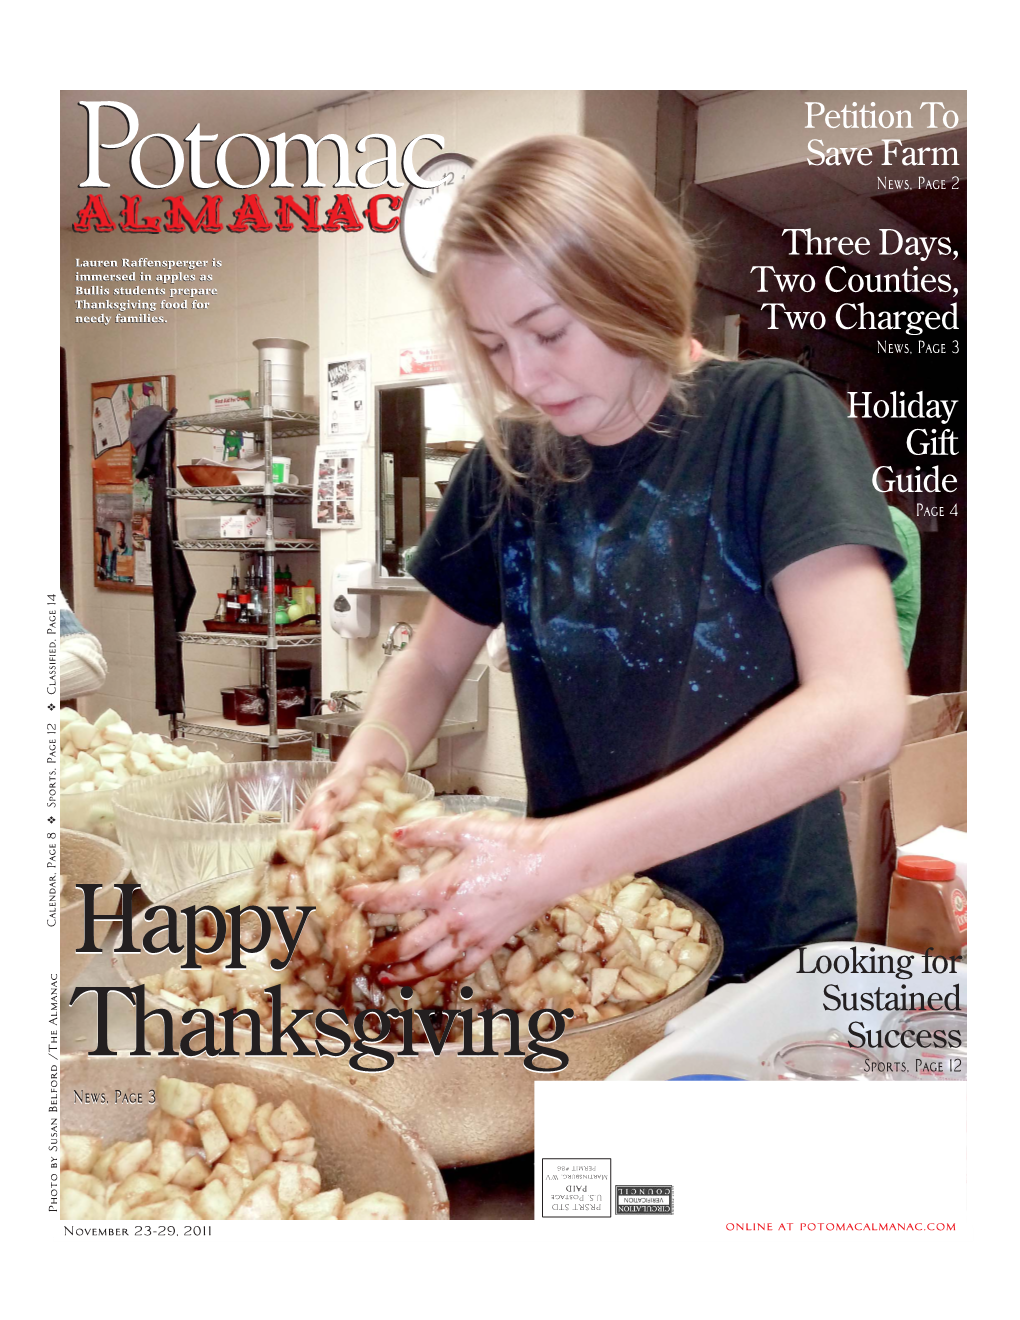 Potomacpotomac News, Page 2 Three Days, Lauren Raffensperger Is Immersed in Apples As Bullis Students Prepare Two Counties, Thanksgiving Food for Needy Families